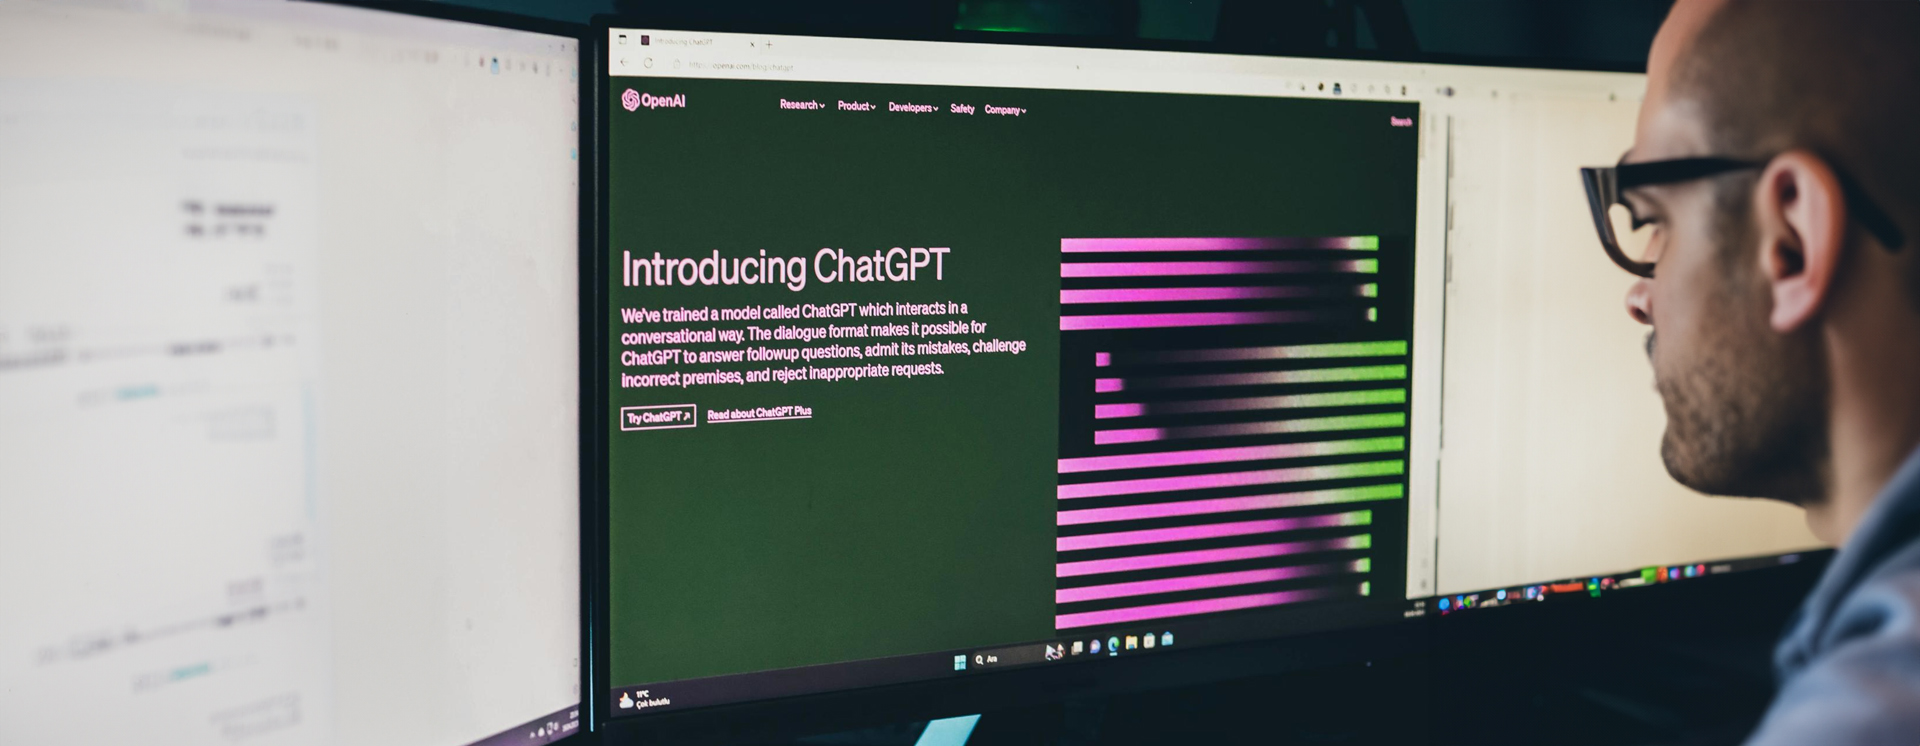 A computer screen showing ChatGPT webpage.